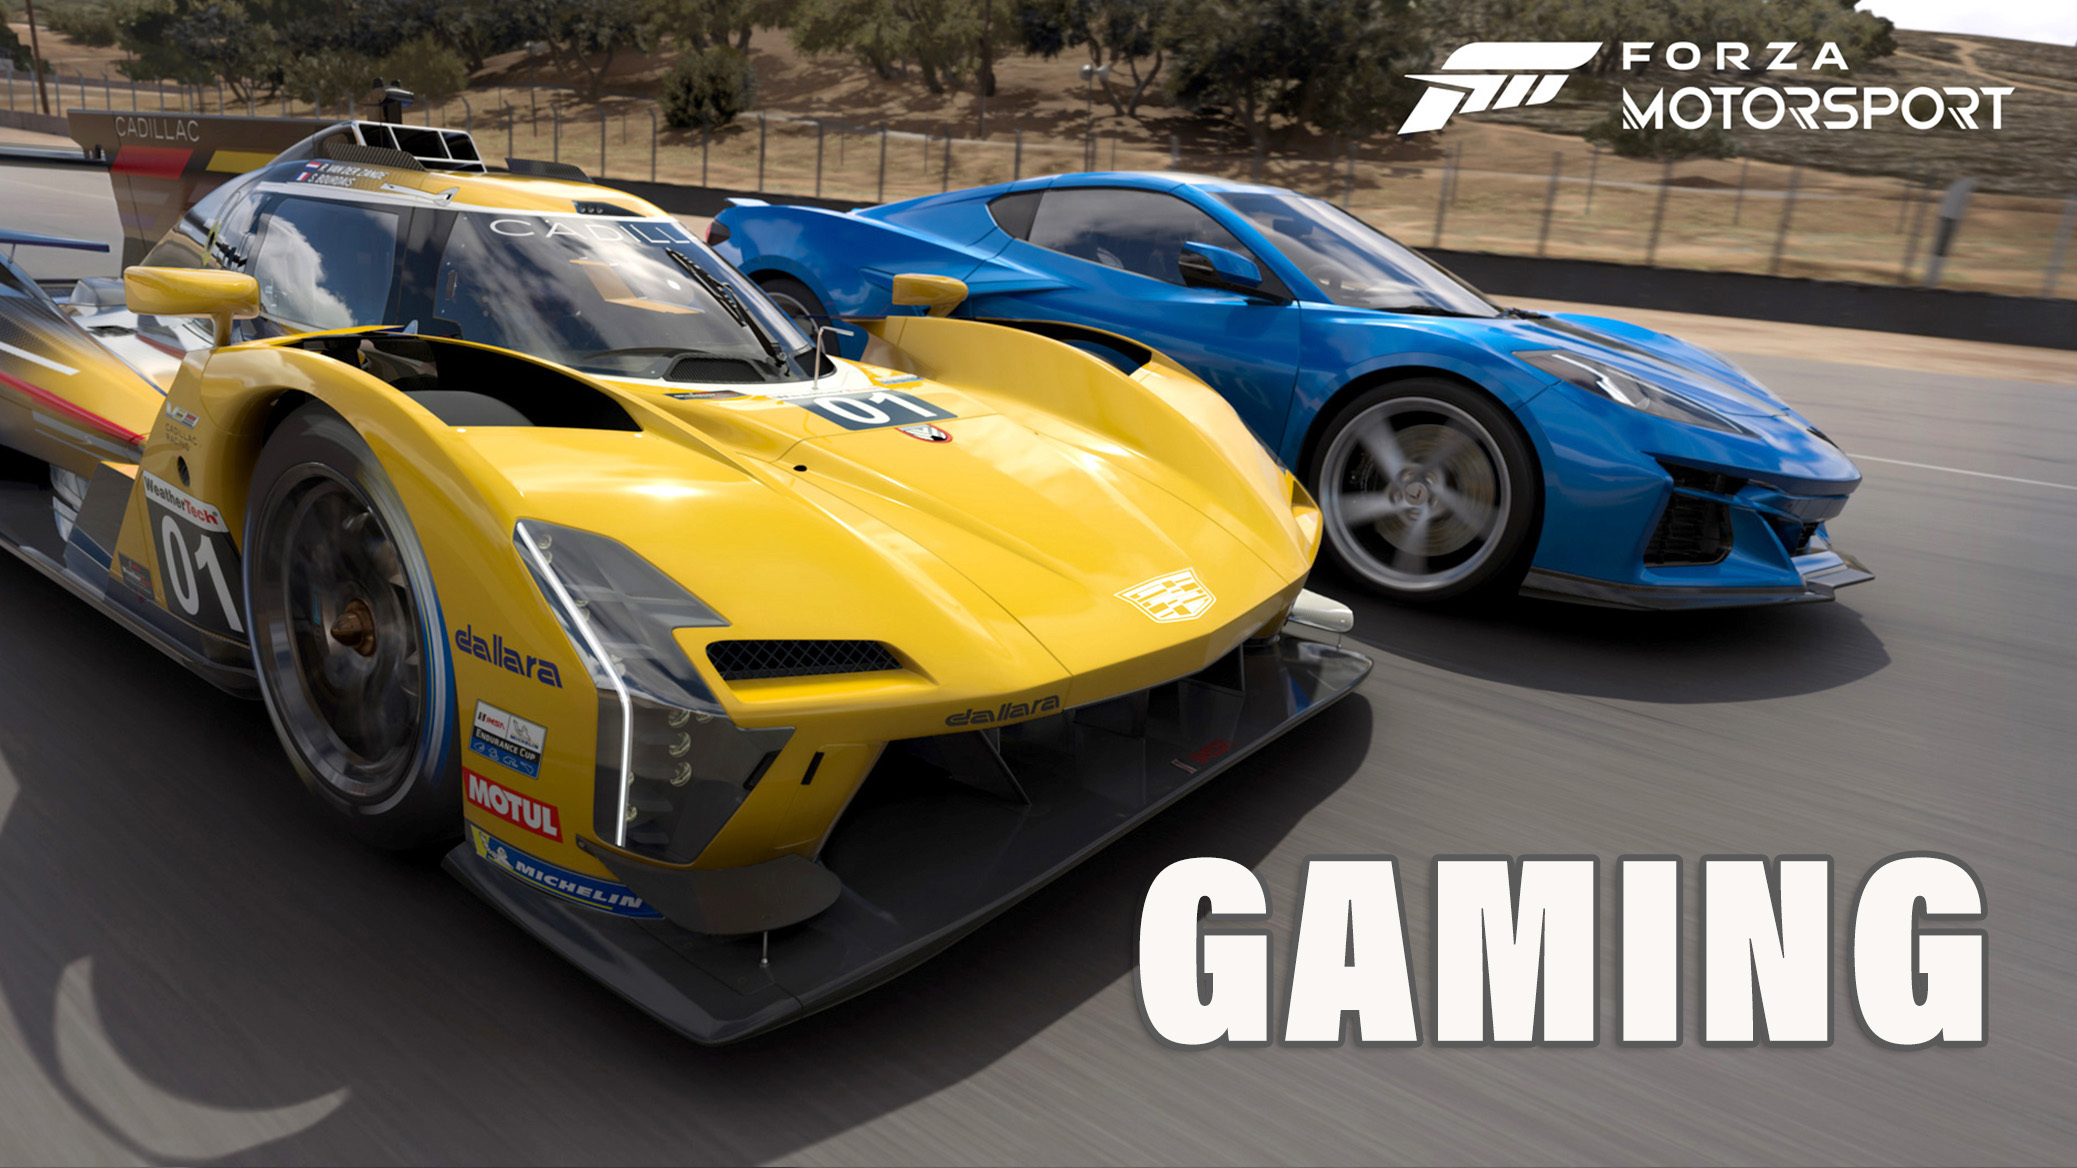 Forza Motorsport release date, cars, trailers, gameplay, and more